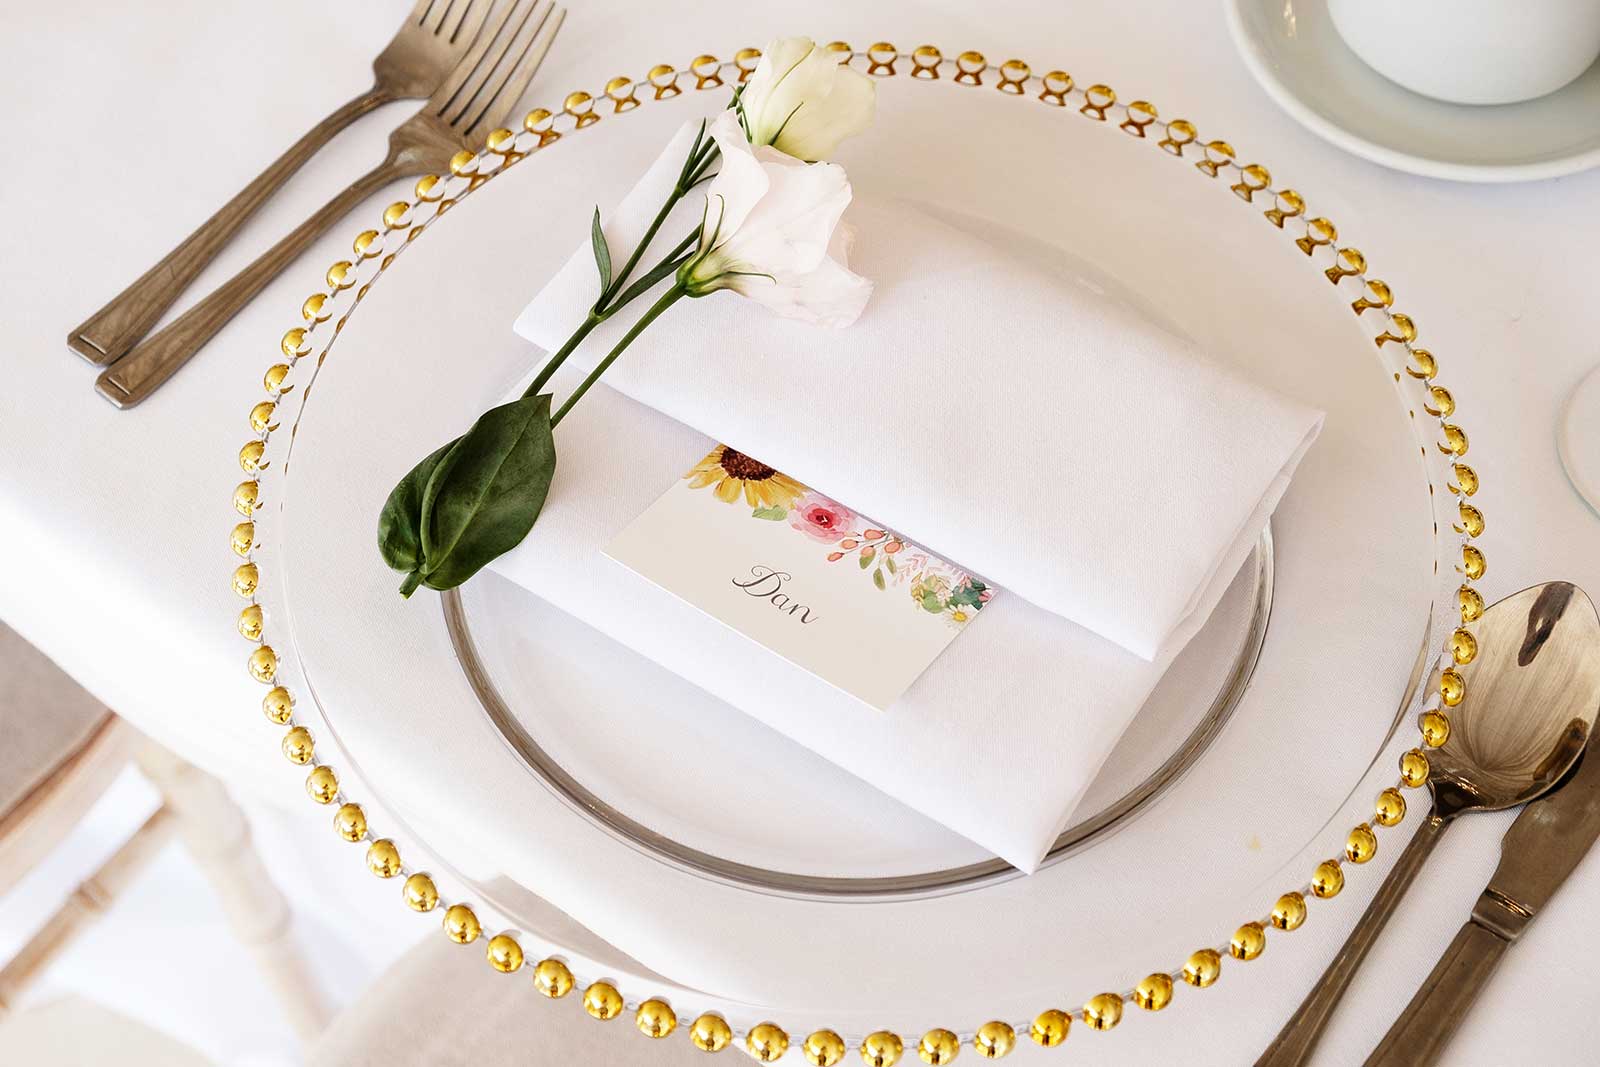 floral place name card with napkin on charger plate